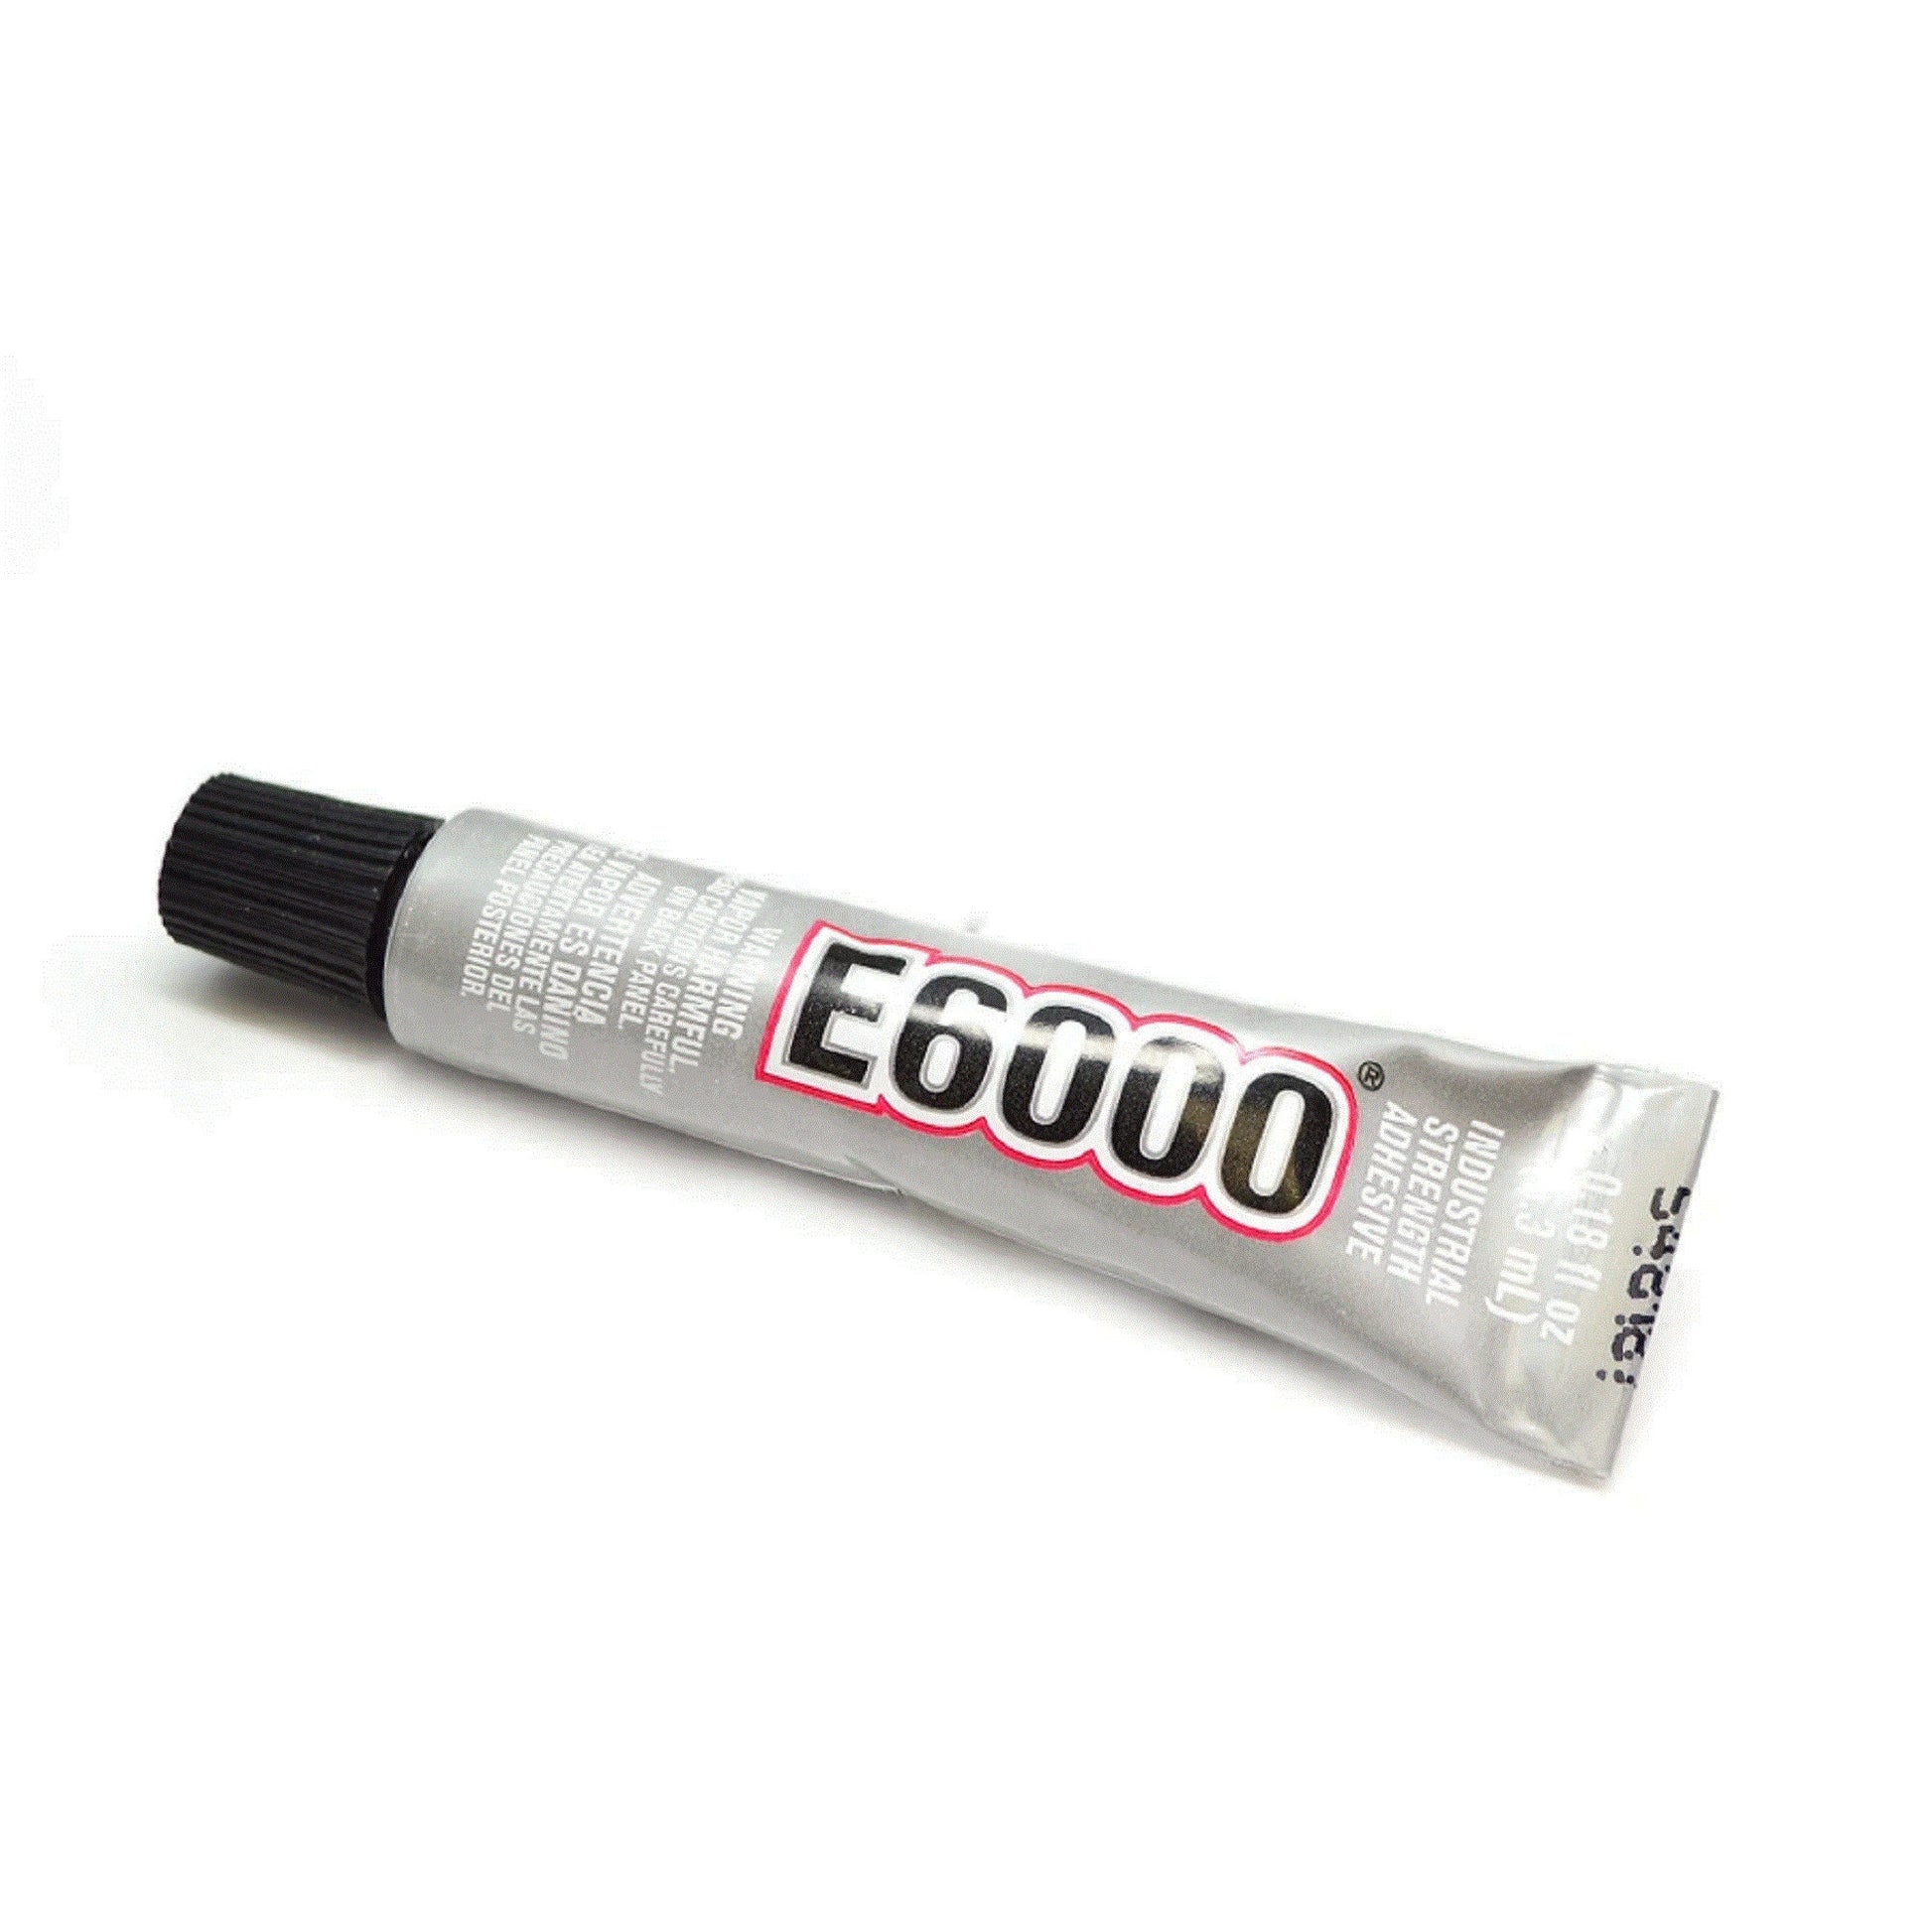 Clear E6000 5.3 ml Glue Ideal for bonding wood, fabric, leather, ceramic, glass, metal and more